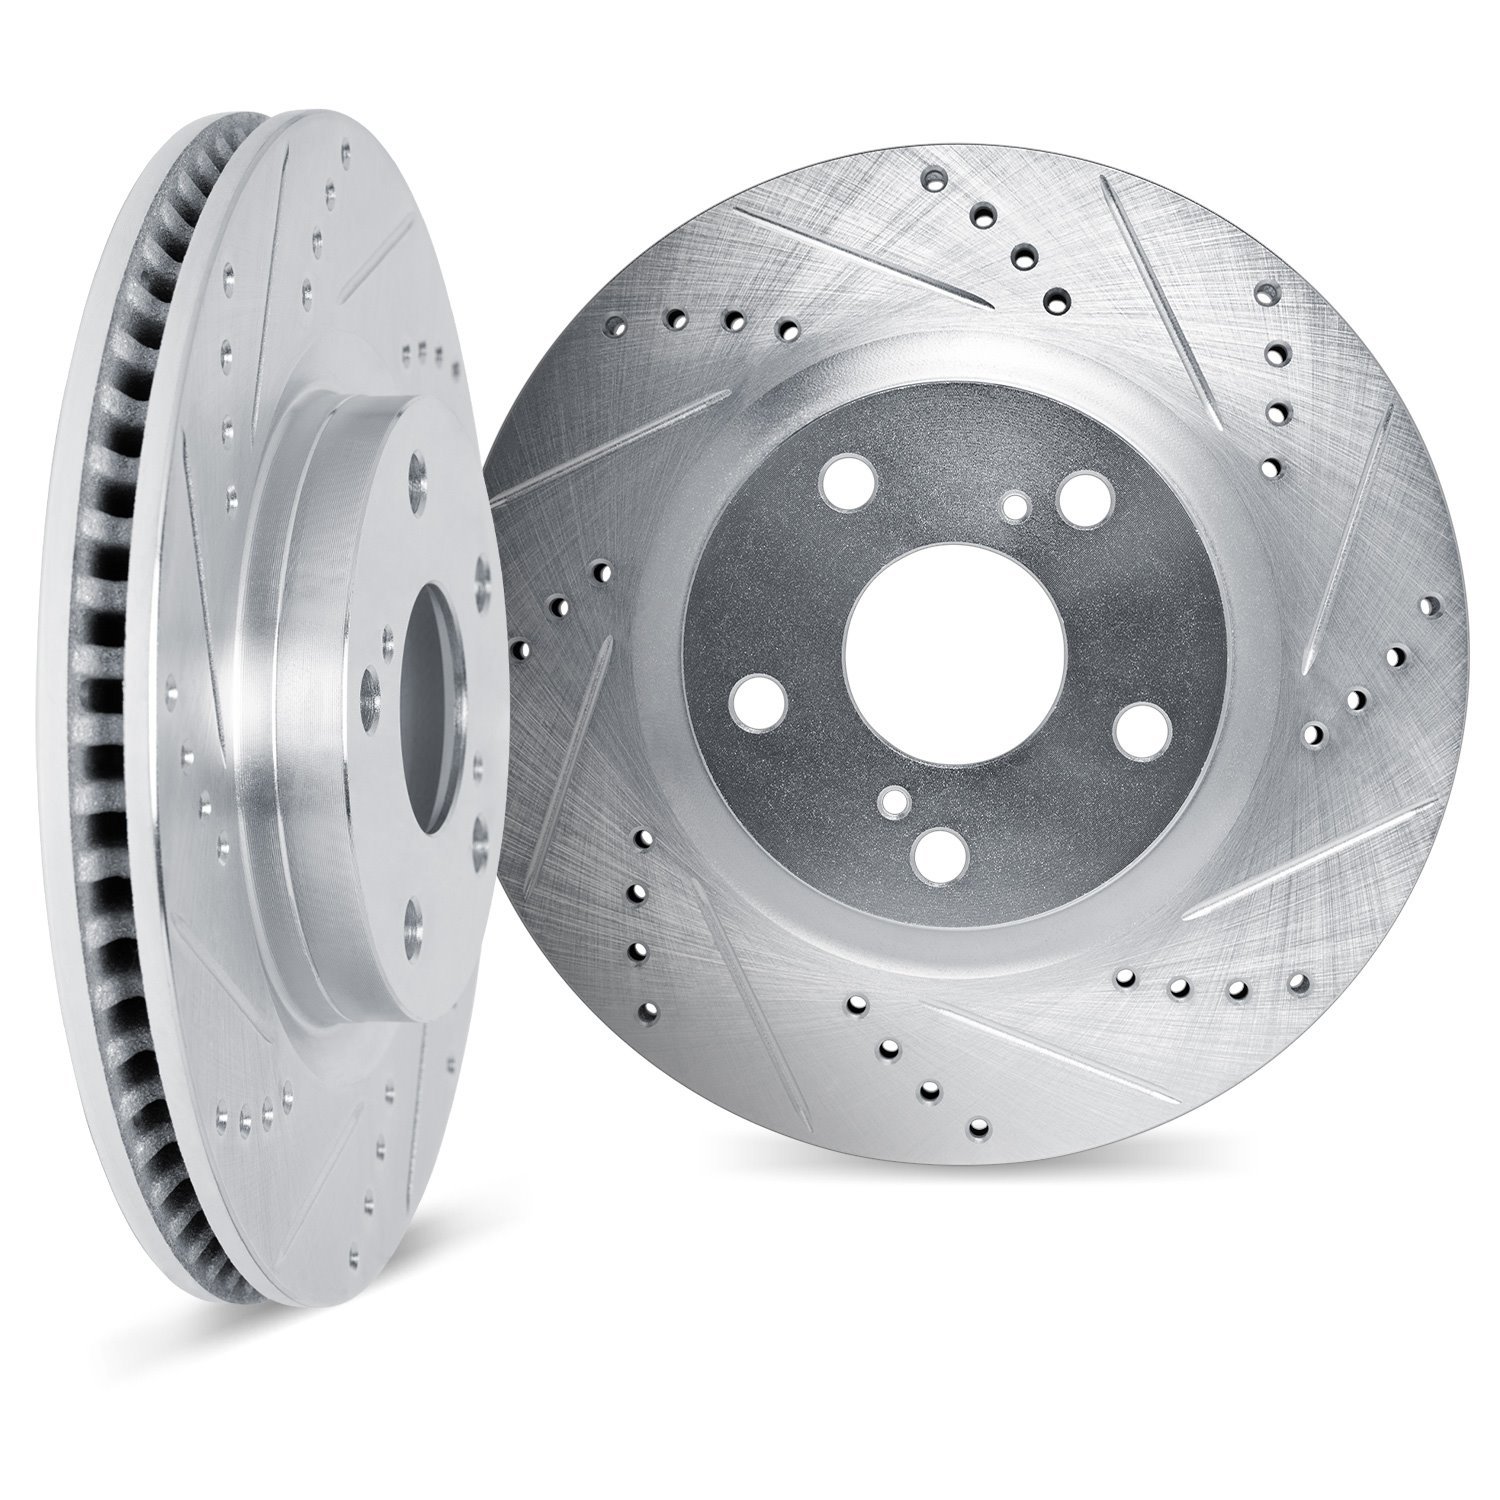 7002-54261 Drilled/Slotted Brake Rotors [Silver], Fits Select Ford/Lincoln/Mercury/Mazda, Position: Front